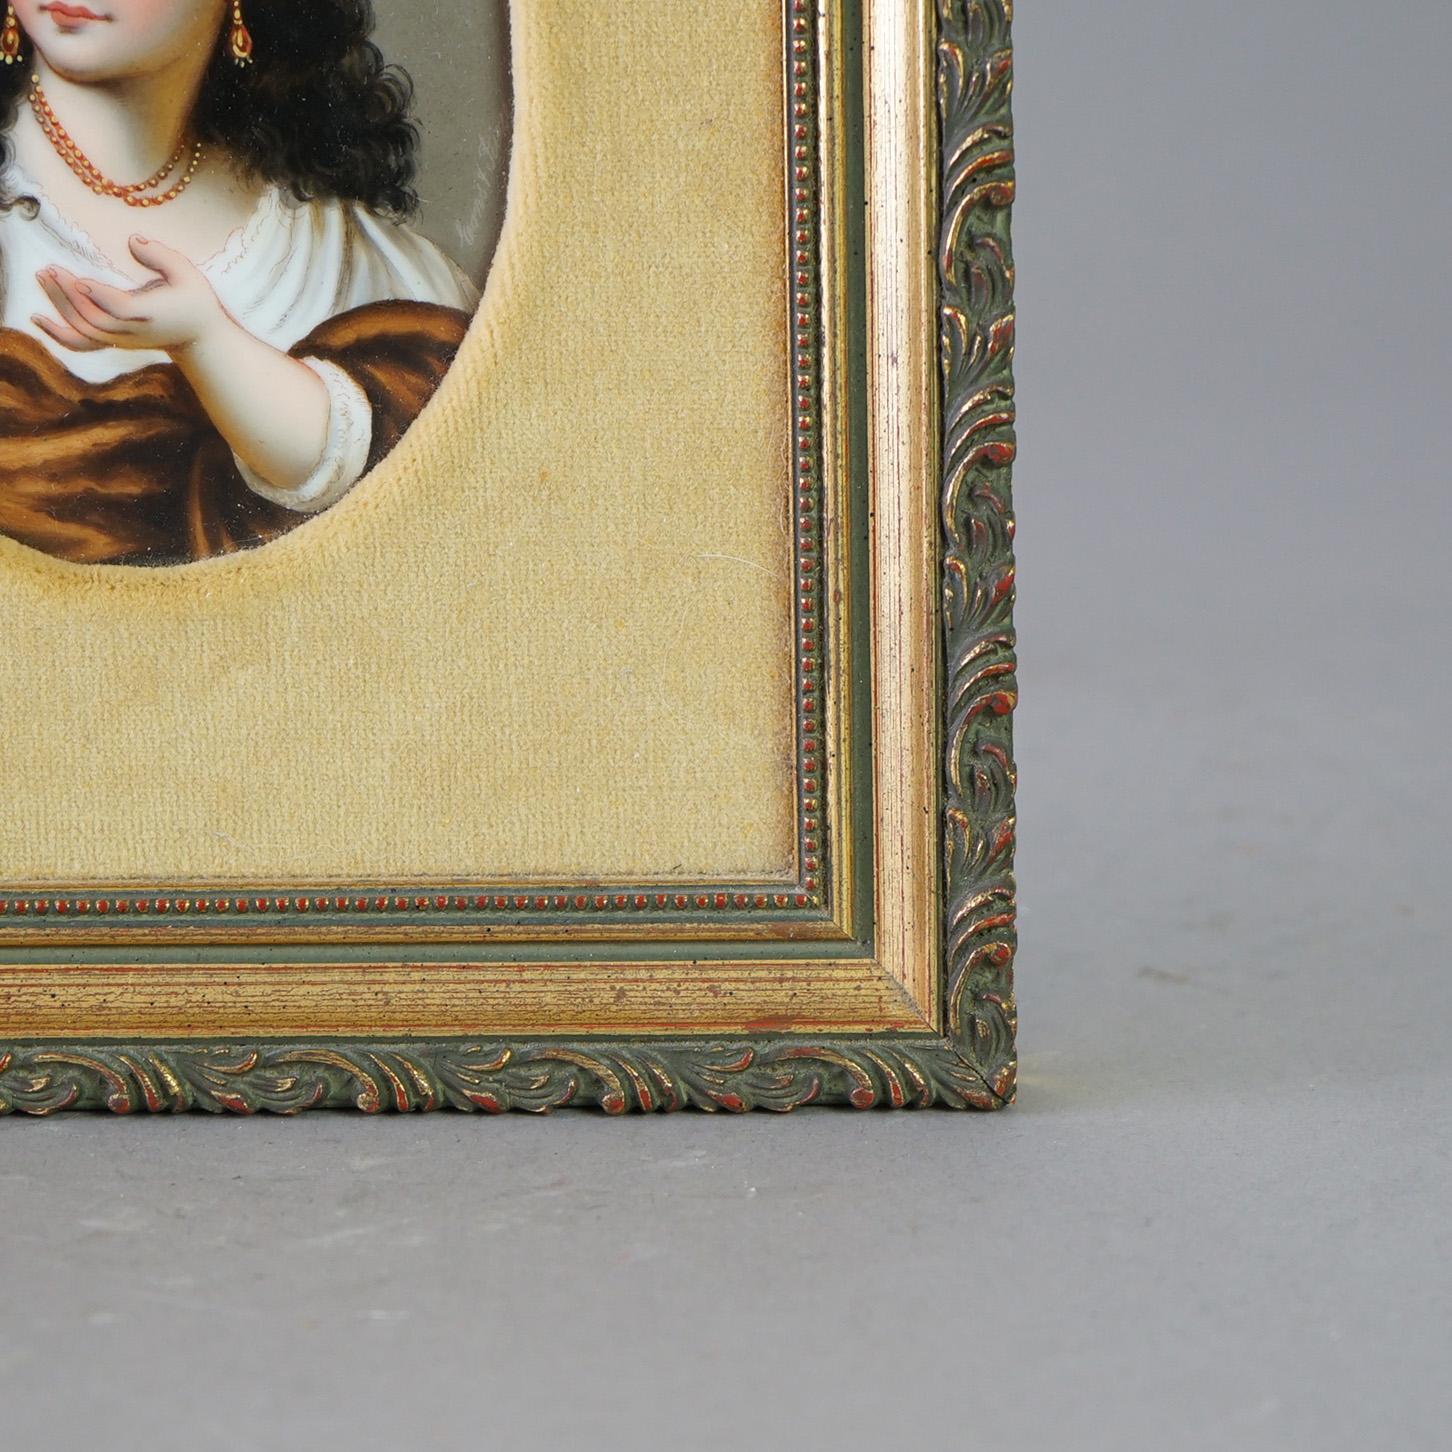 Antique KPM School Portrait Painting on Porcelain of Gypsy Girl Late 19th C For Sale 5